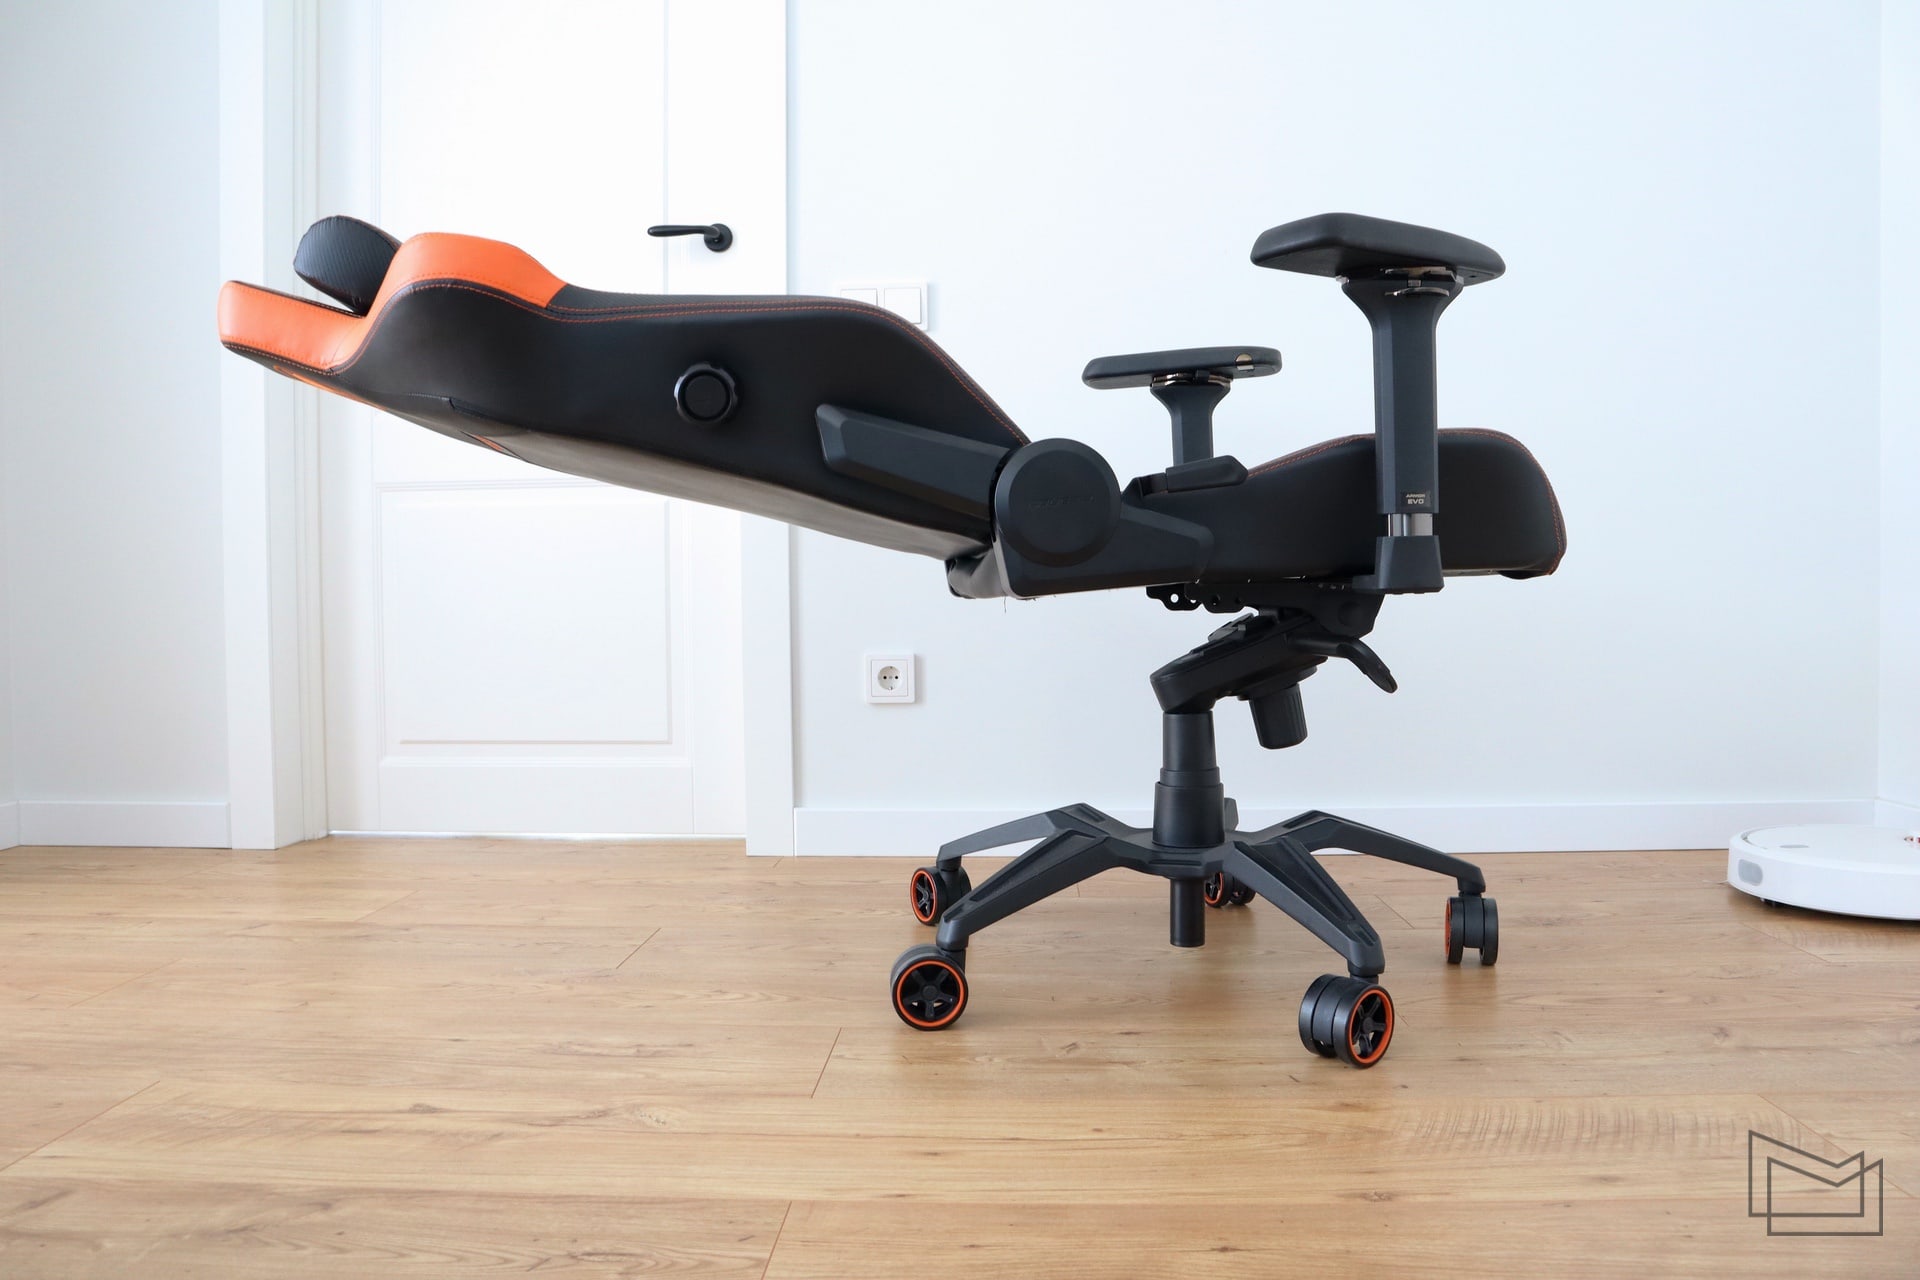 Cougar Armor EVO review - lumbar support chair for long hours of work and  gaming •